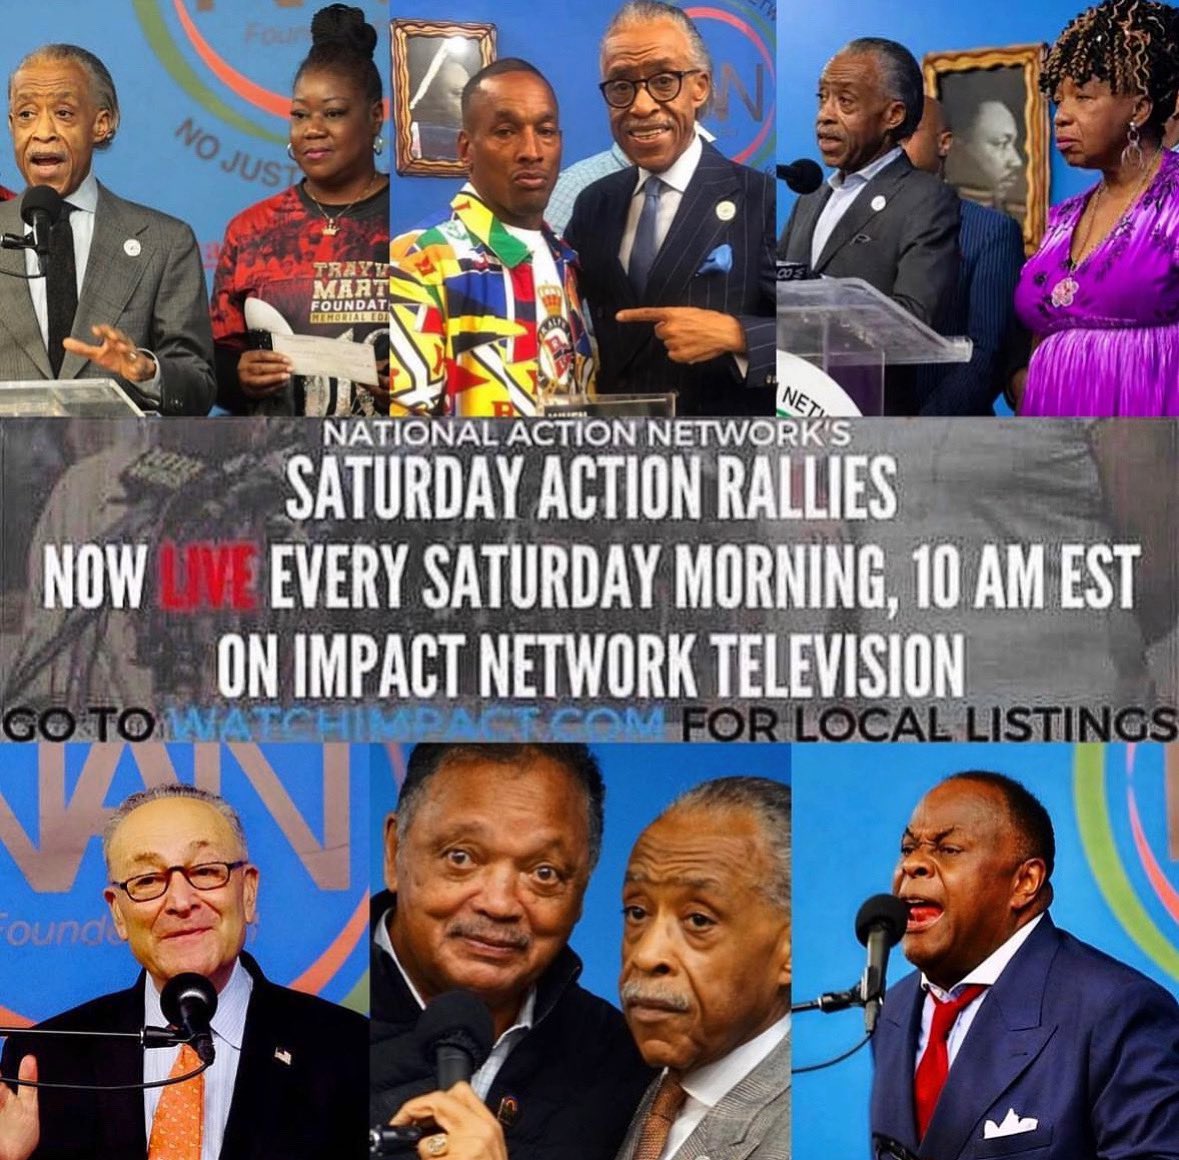 🗣TODAY, @NationalActionNetwork (NAN) will broadcast live across the country. Tune in to the #NANSaturdayActionRally at 9am ET via @1190amWLIB(radio)📻 & at 10am ET on @ImpactTVNetwork📺. You can also tune in online via NAN’s Facebook or YouTube. #getintotheaction